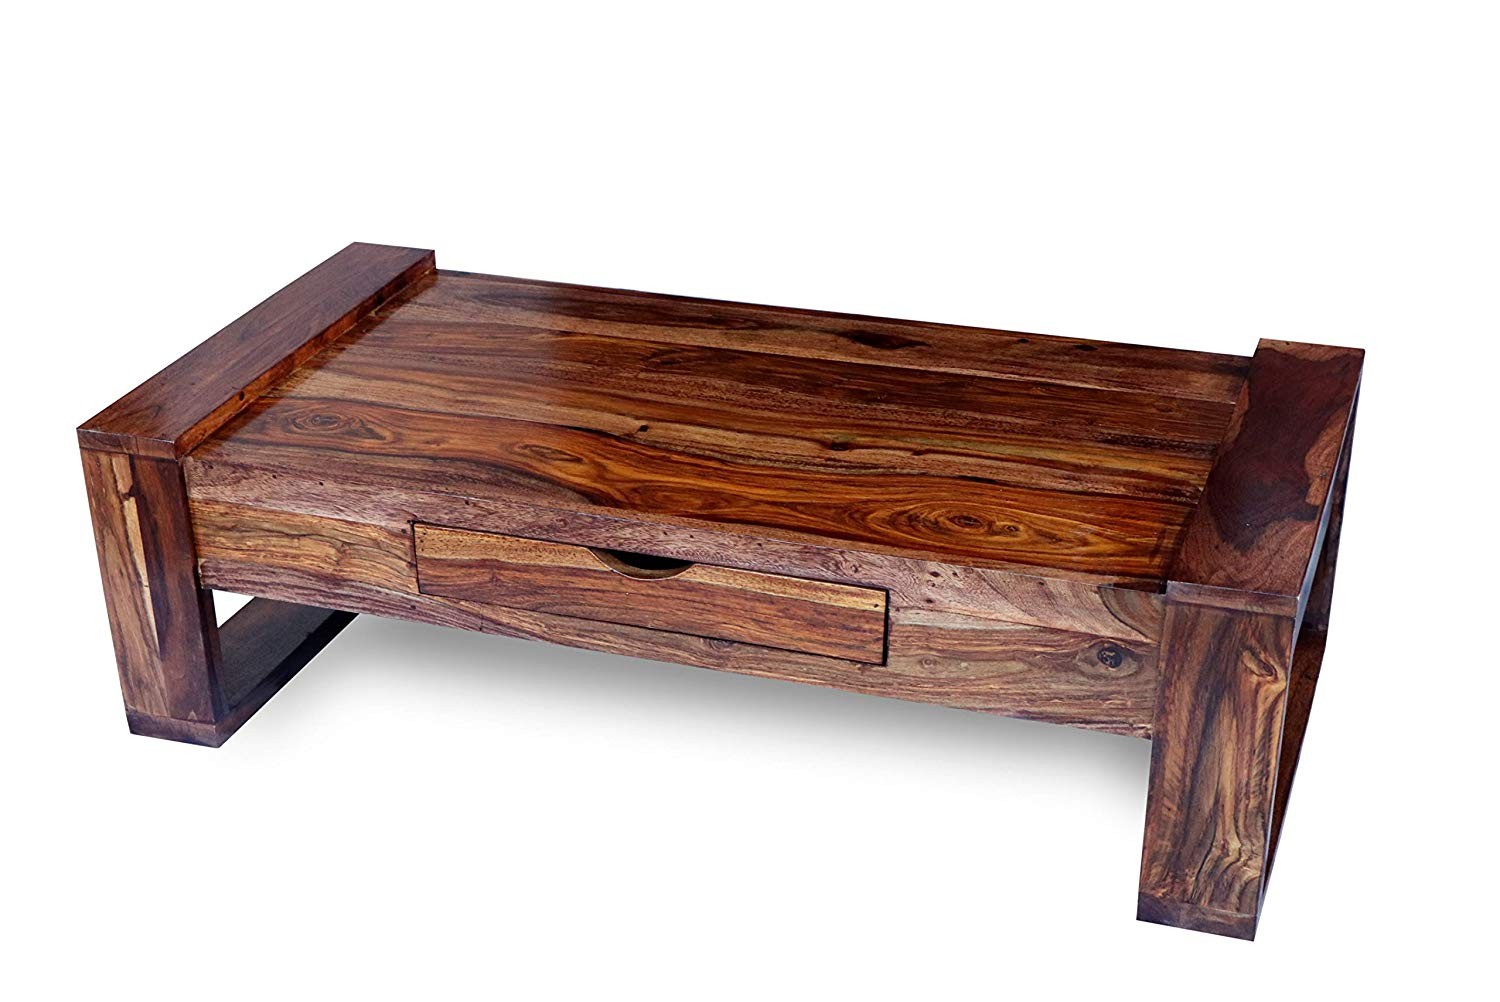 Quartz Wood Center Table | Coffee Table with Drawer | Living Room Table with Drawer - Natural Teak Finish